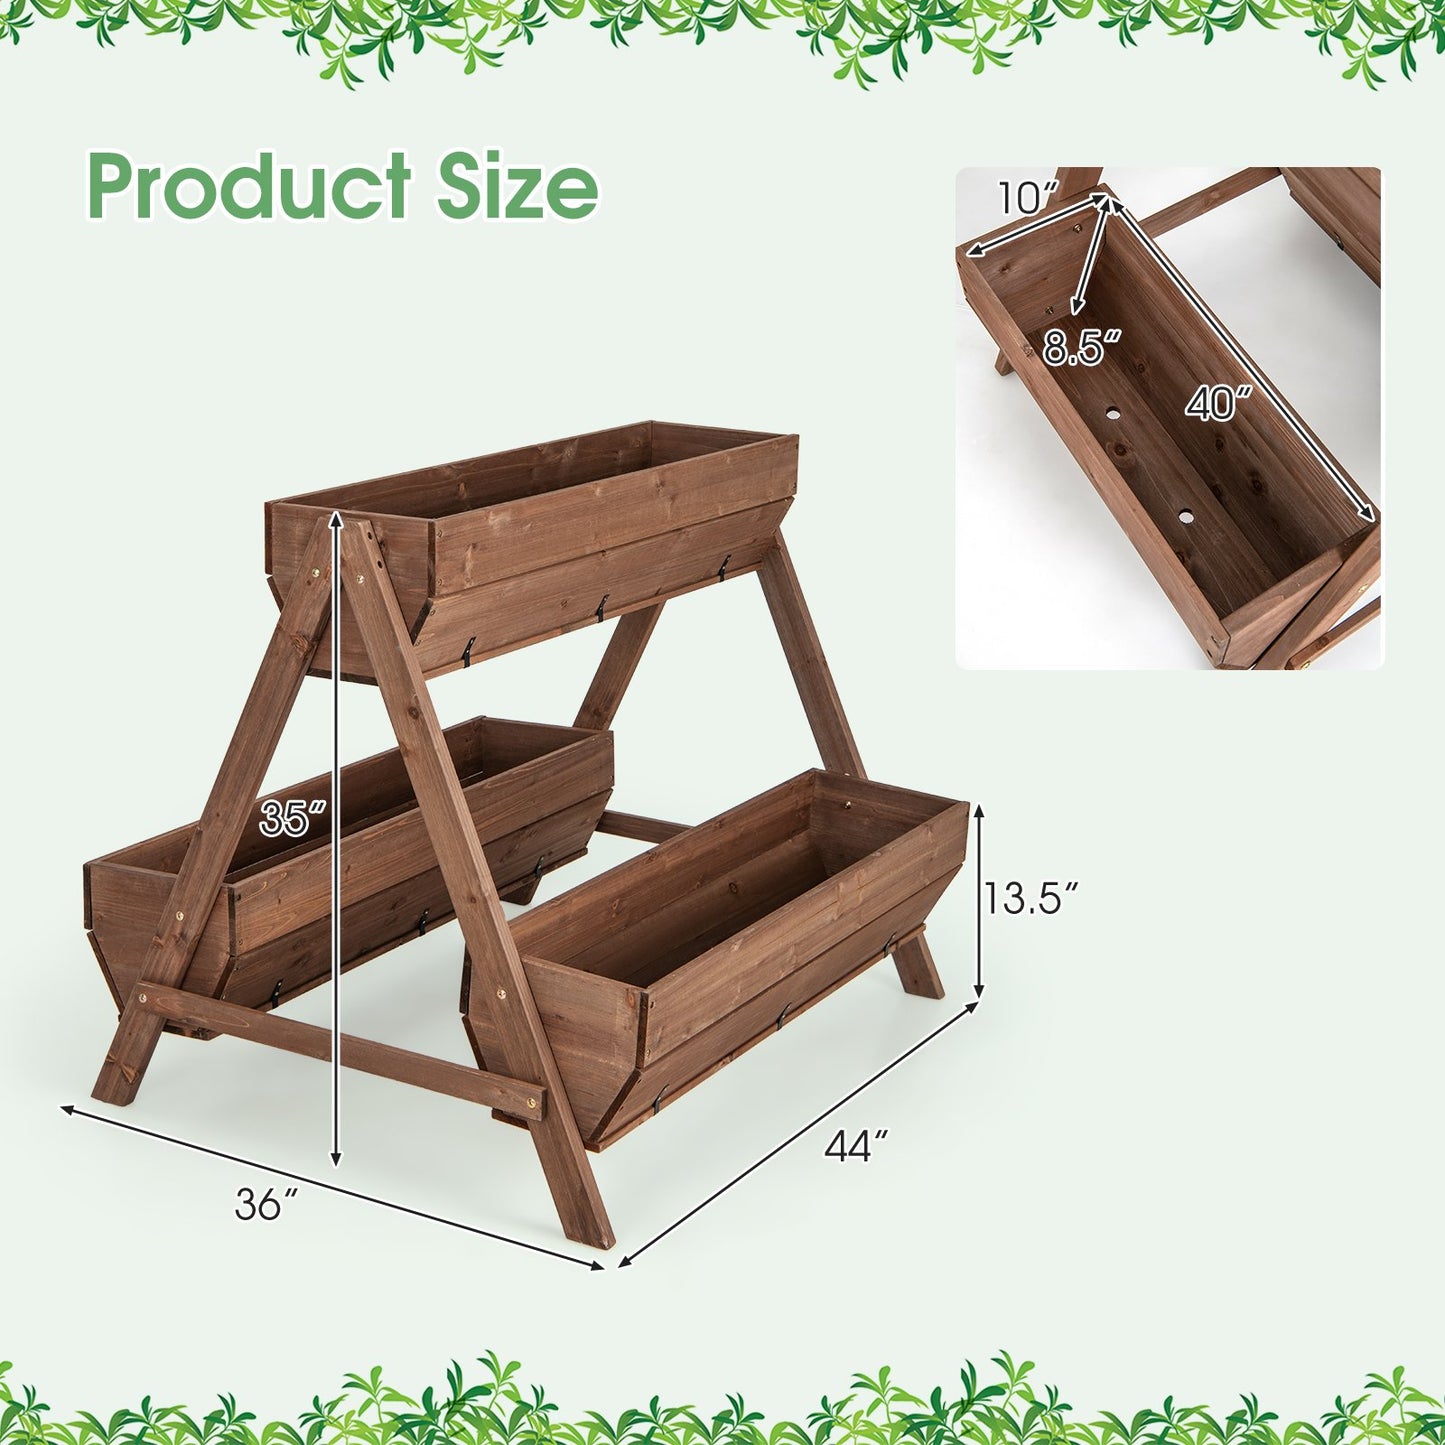 Vertical Raised Garden bed with 3 Wooden Planter Boxes-L, Brown